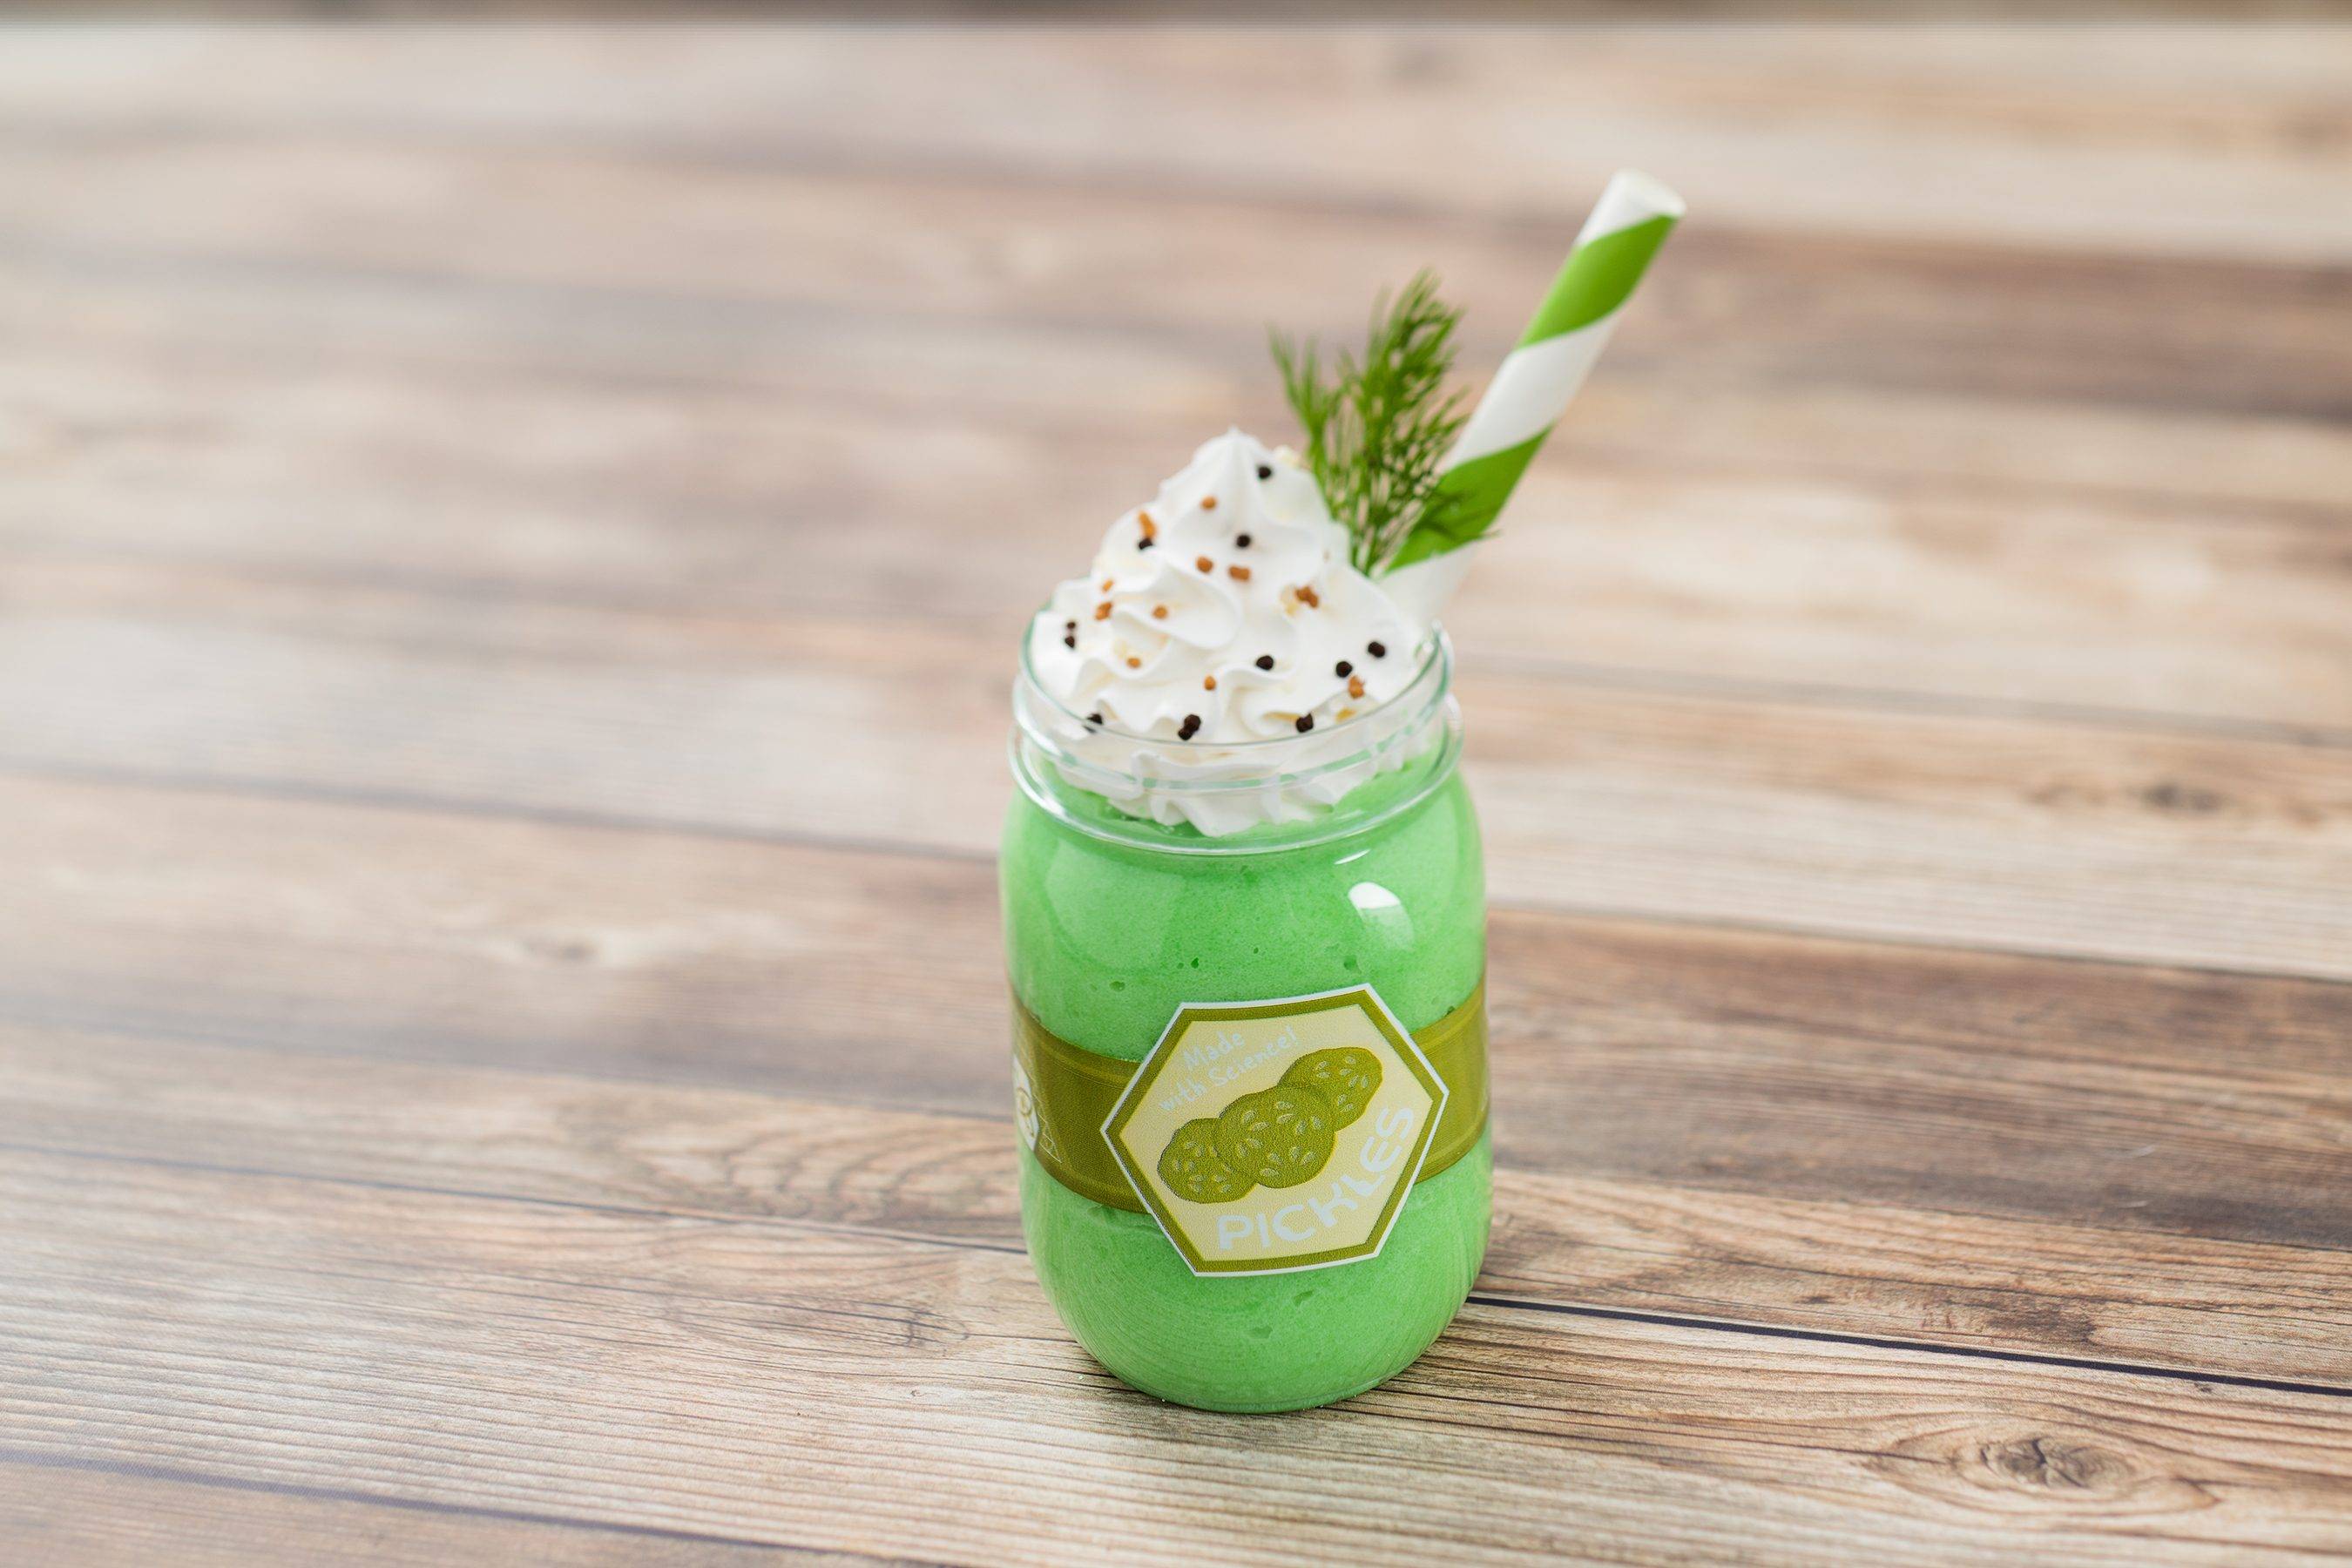 The Pickle Milkshake at Brew-Wing Lab at the Odyssey